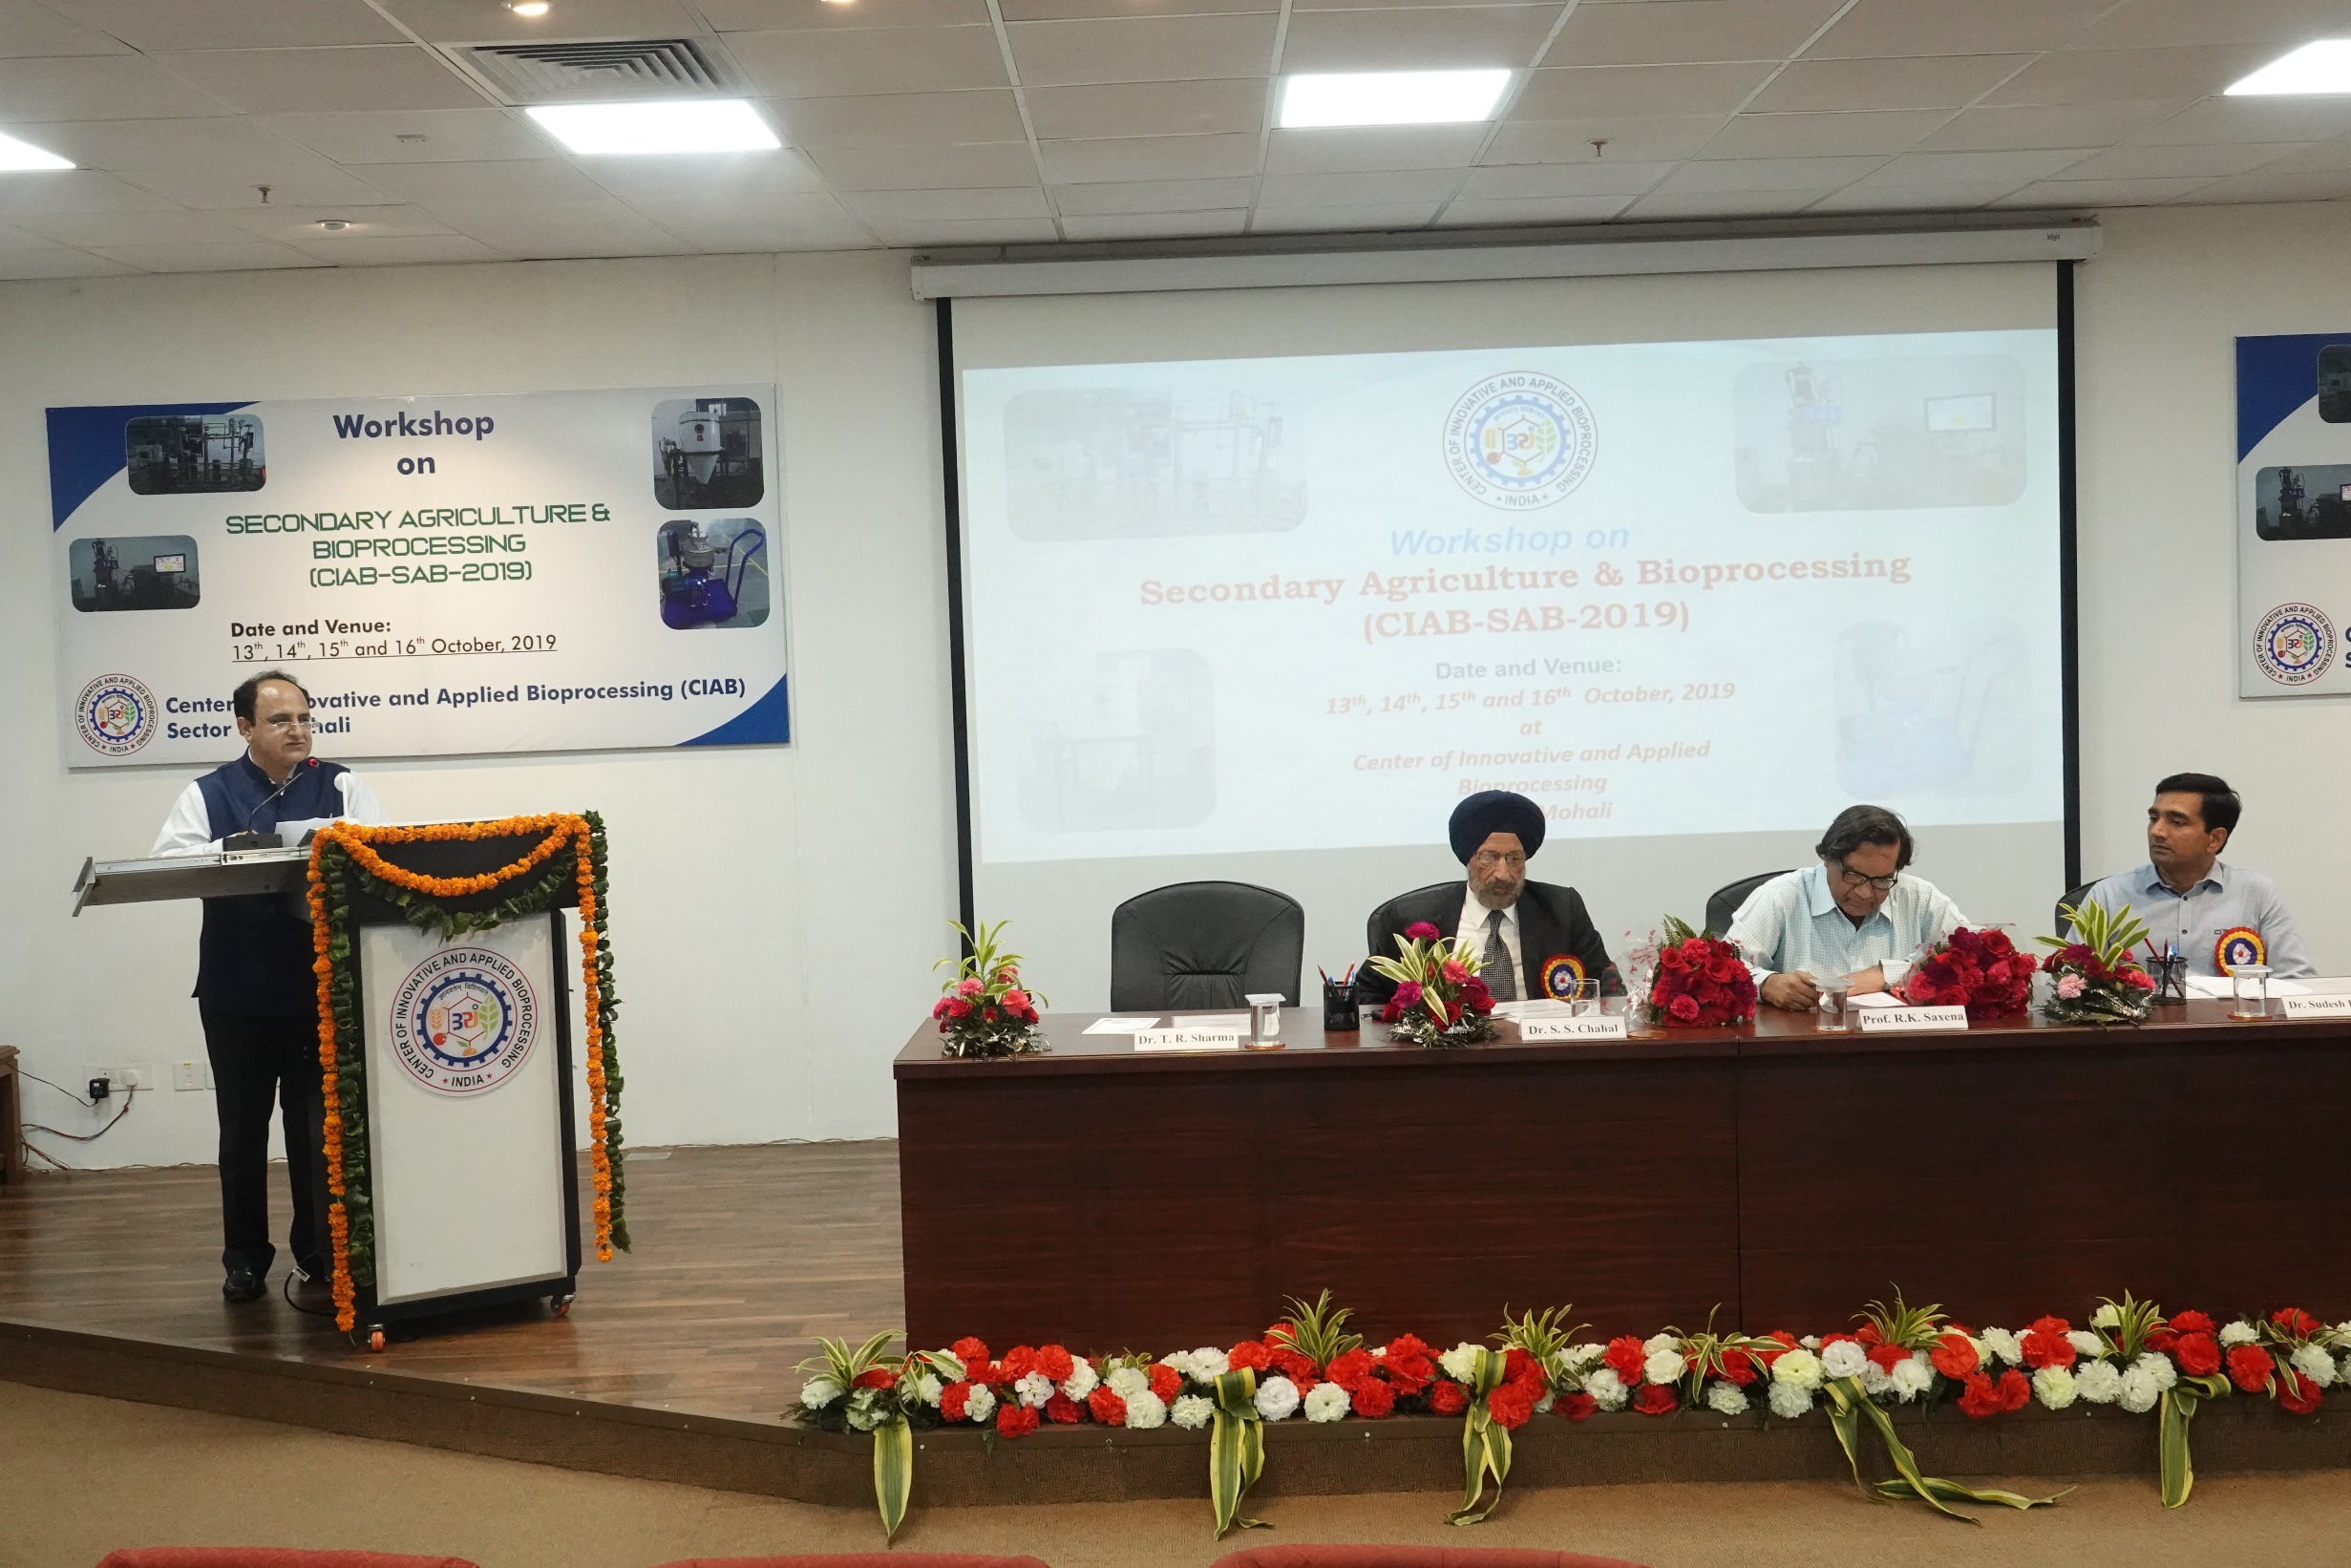 Workshop on Secondary Agriculture & Bioprocessing 